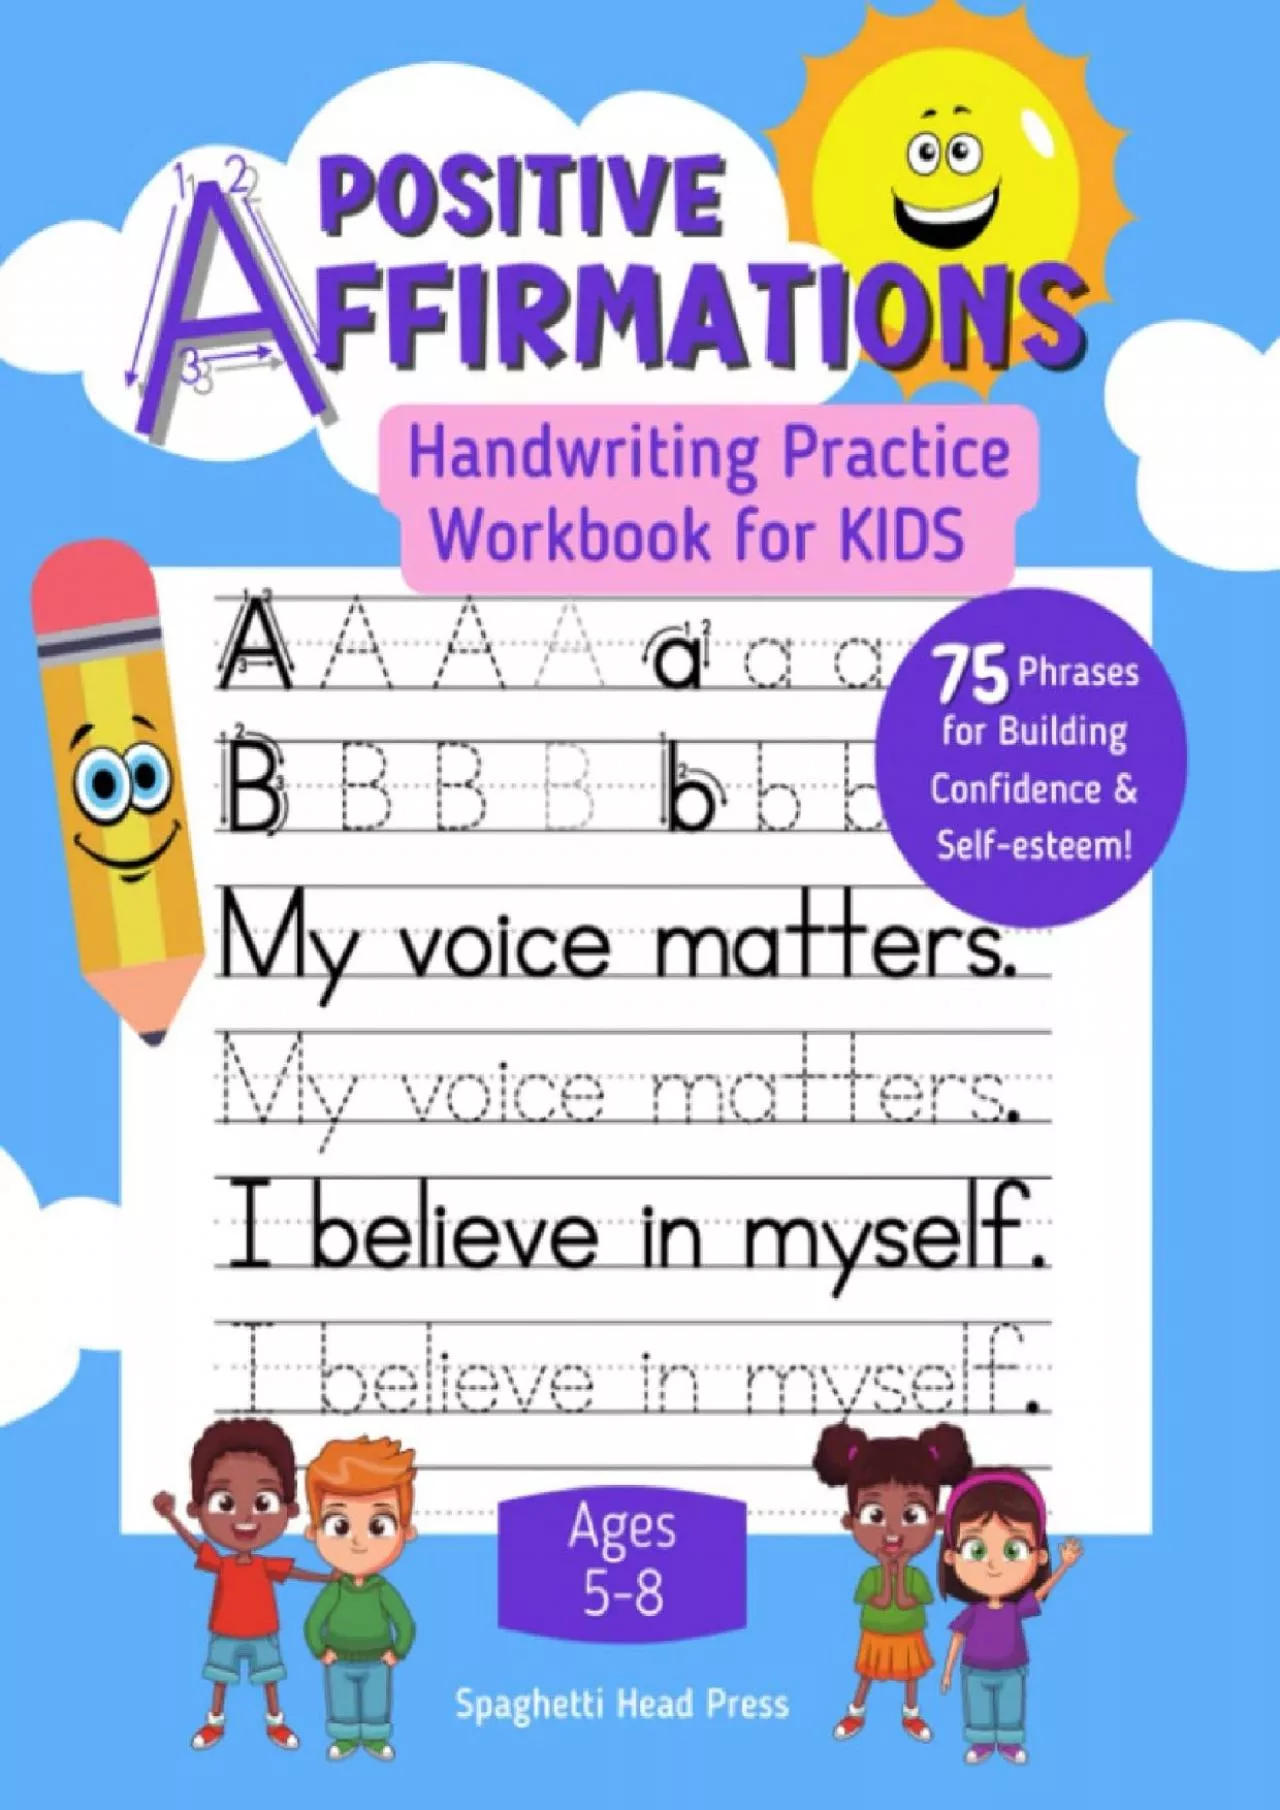 [EBOOK] Positive Affirmations Handwriting Practice Workbook for Kids: Phrases for Building